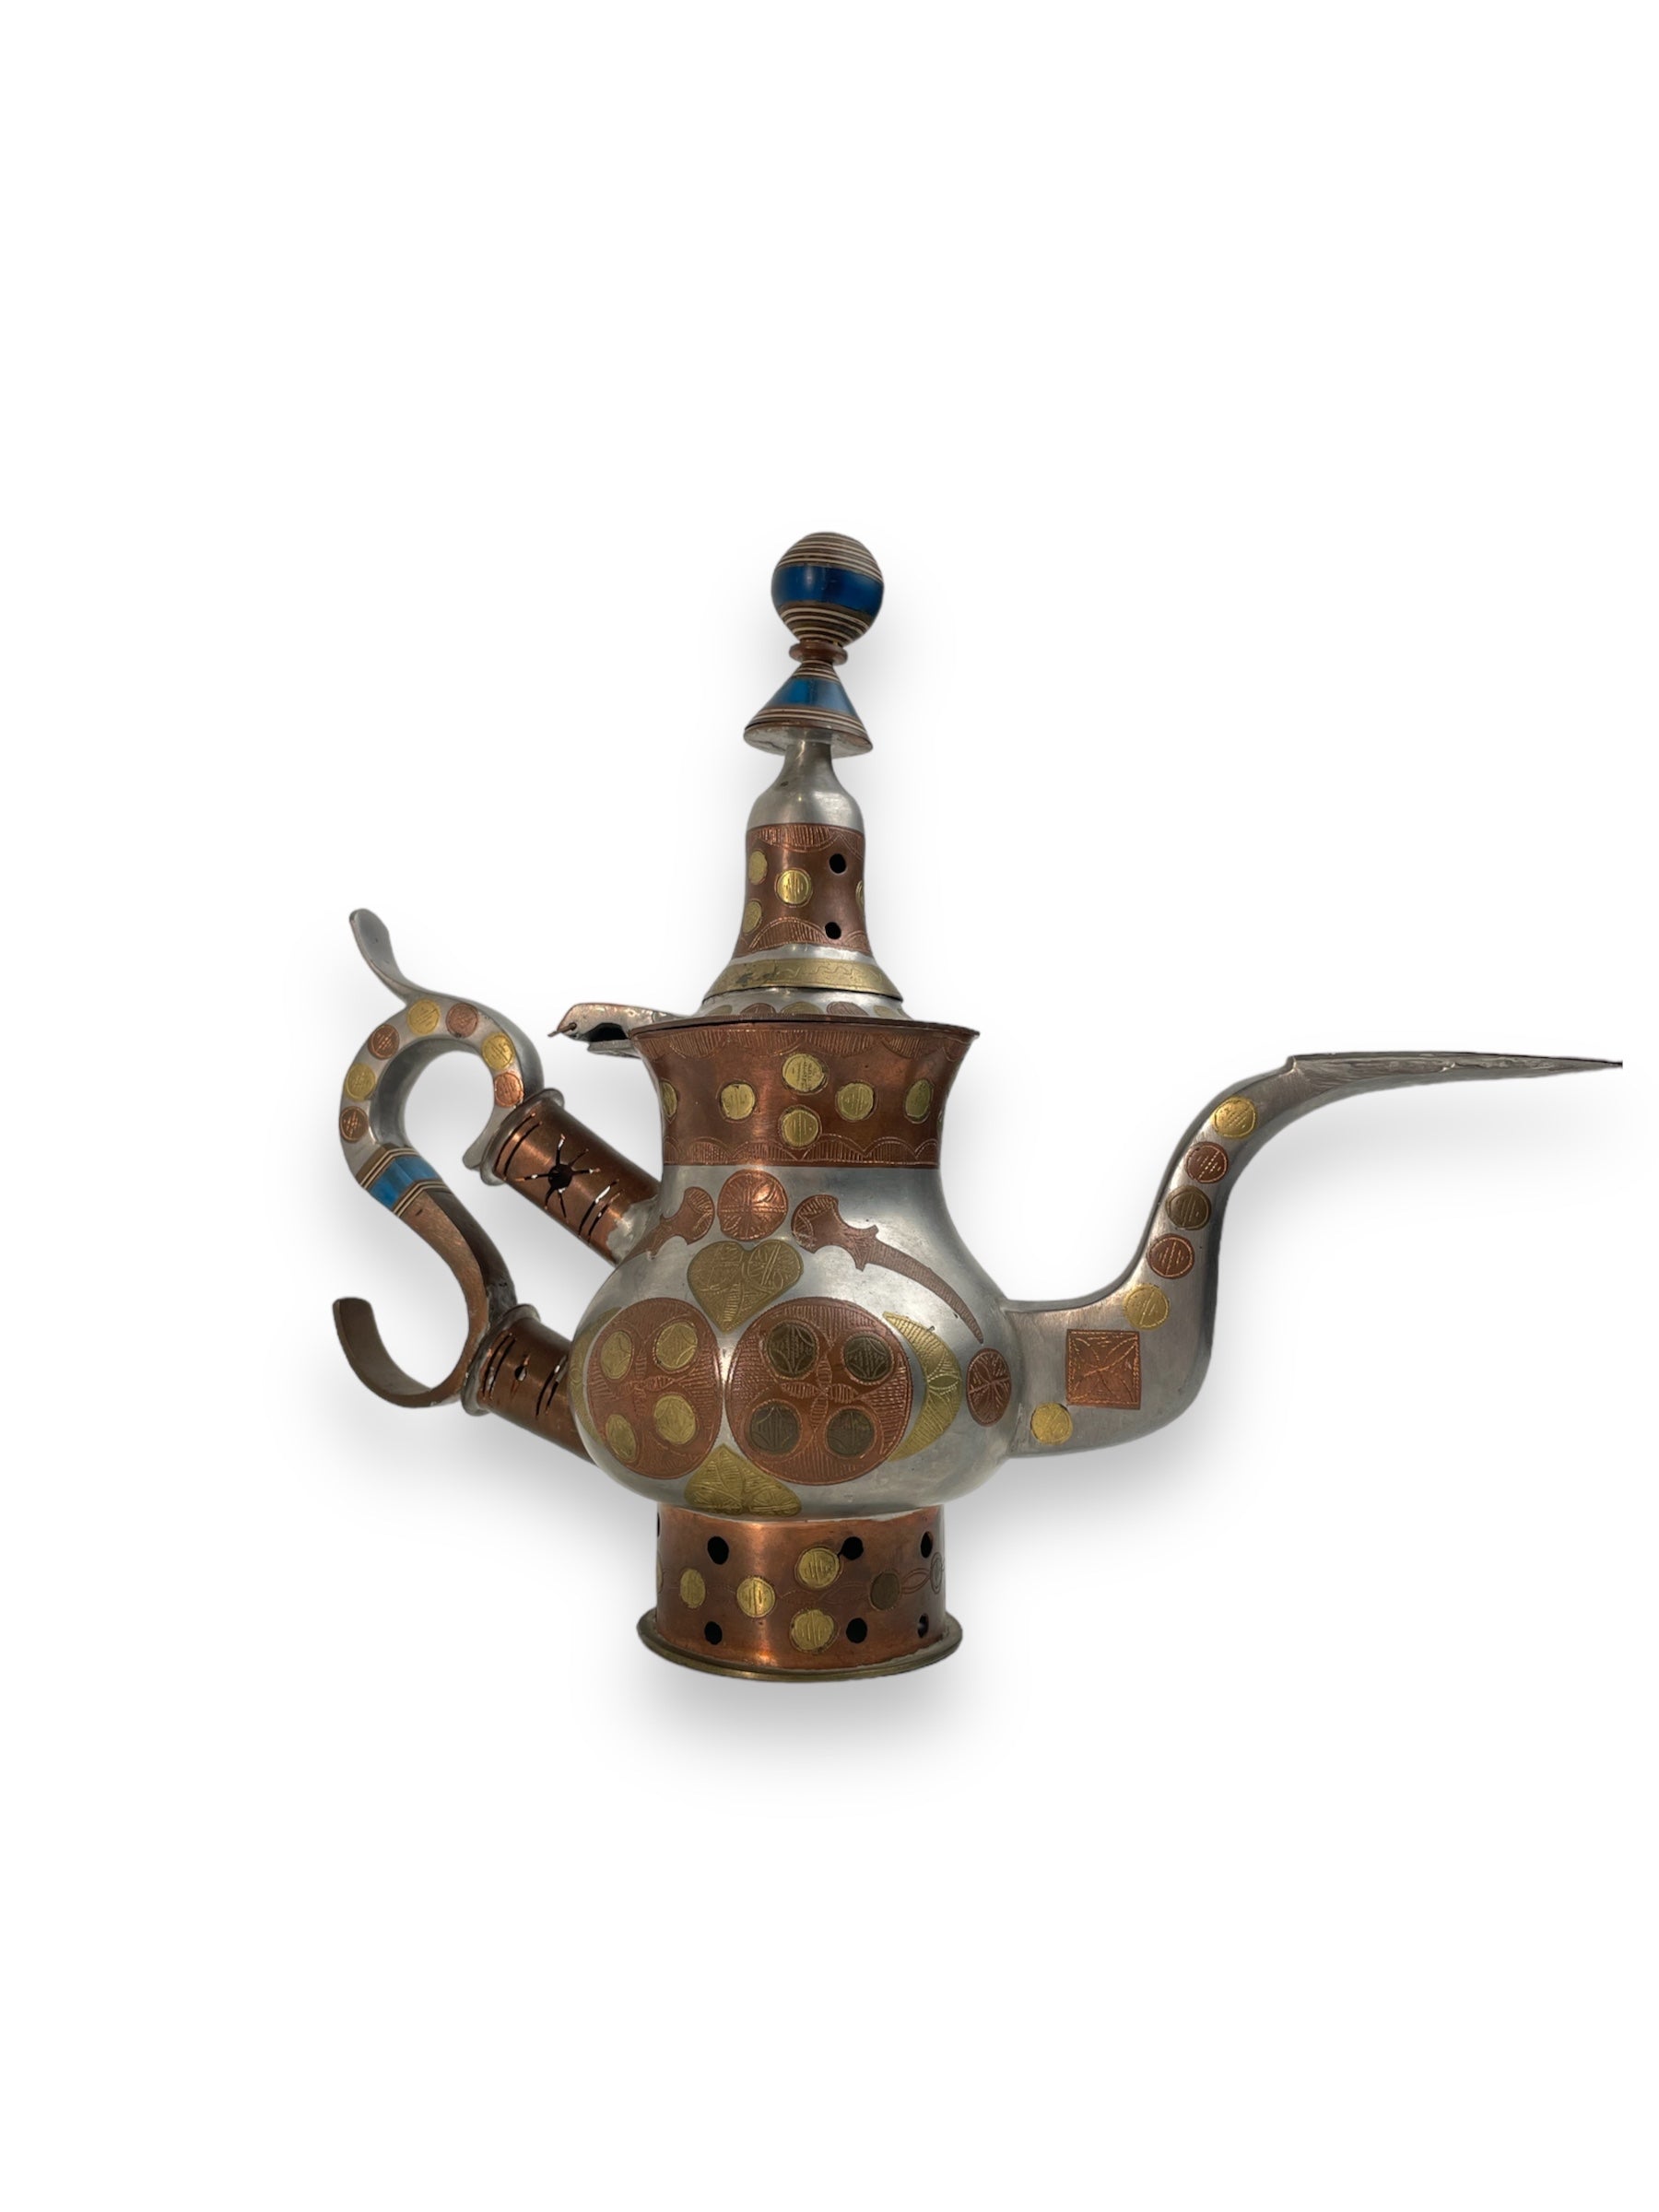 Vintage Copper and Stainless Steel Teapot